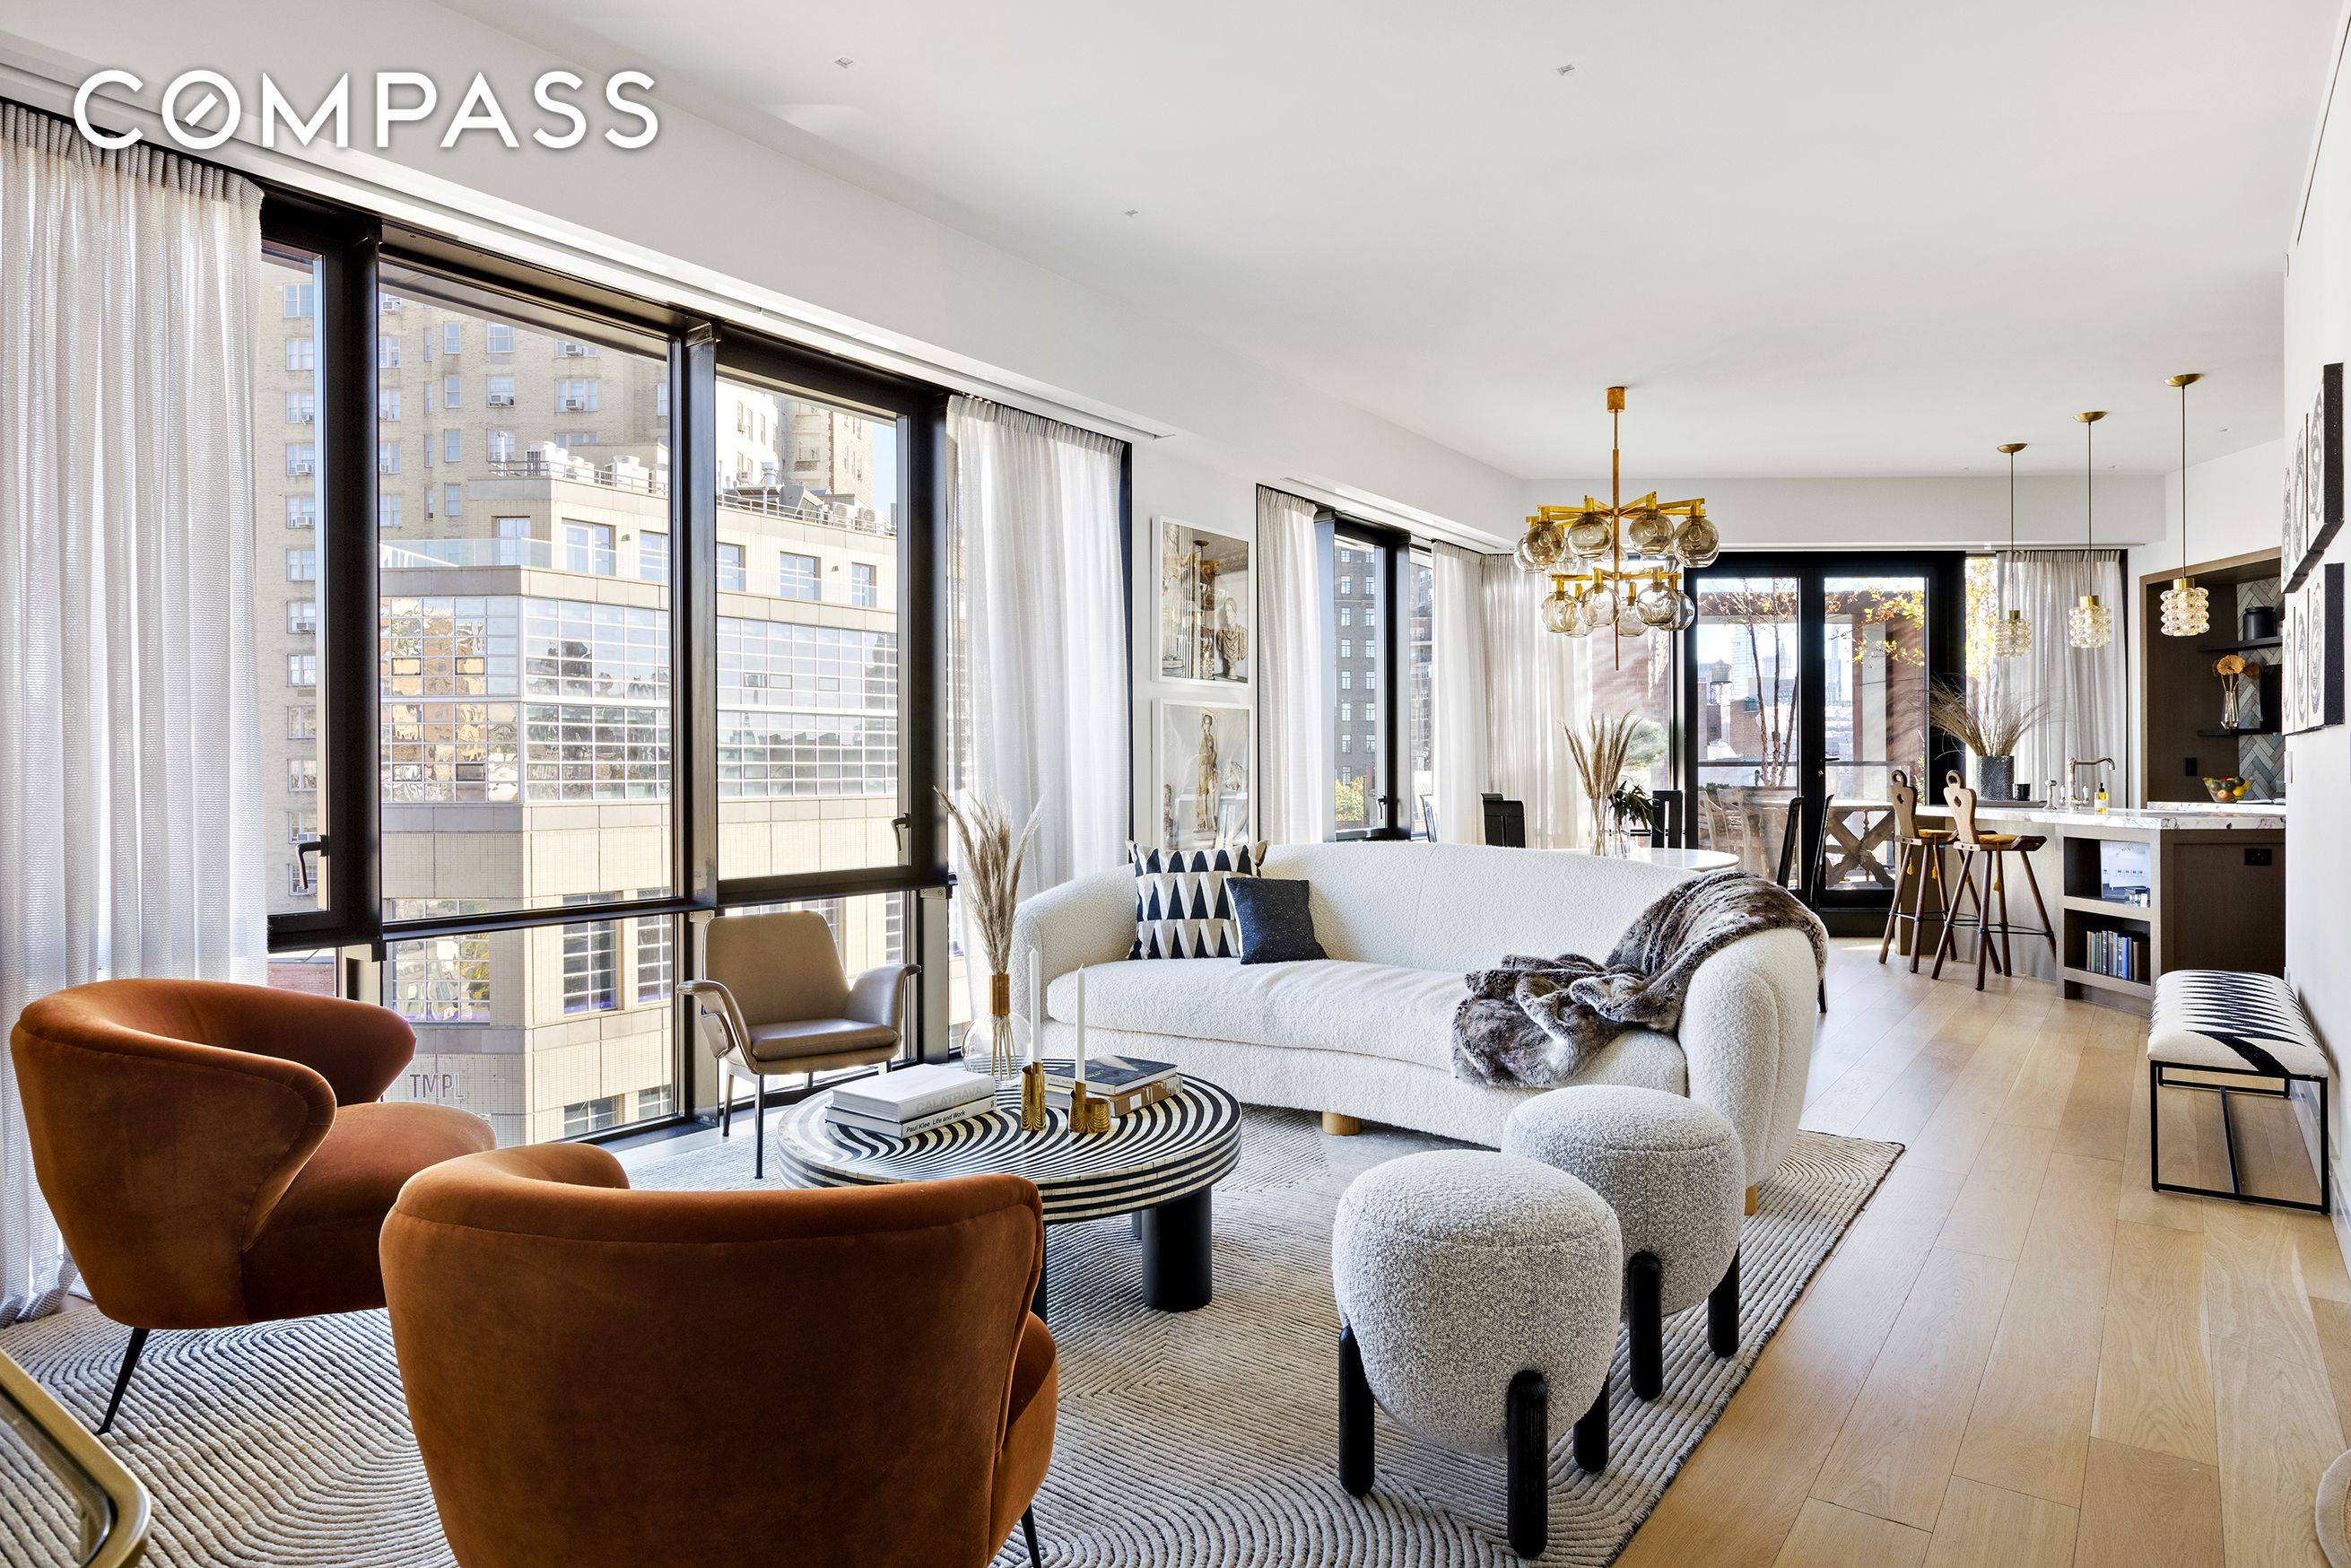 An ultra luxurious duplex penthouse awaits the discerning buyer, resting atop the boutique condominium 175 West 10th Street in the heart of the West Village.